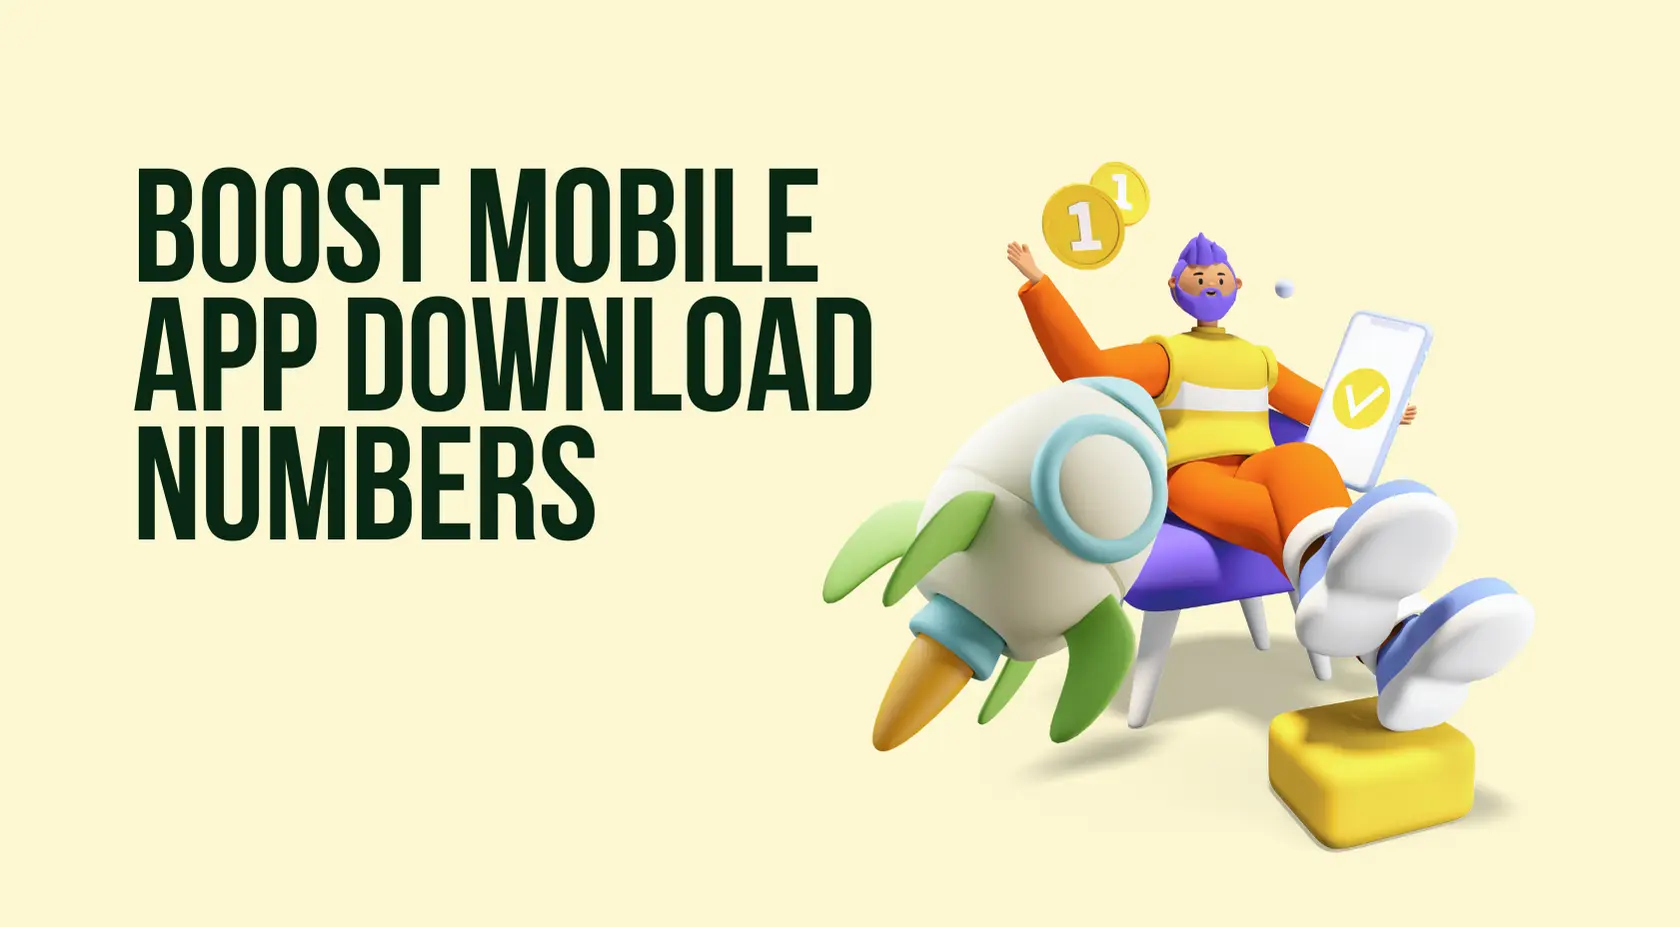 Promote Your Mobile App & Boost Download Numbers with a Popup